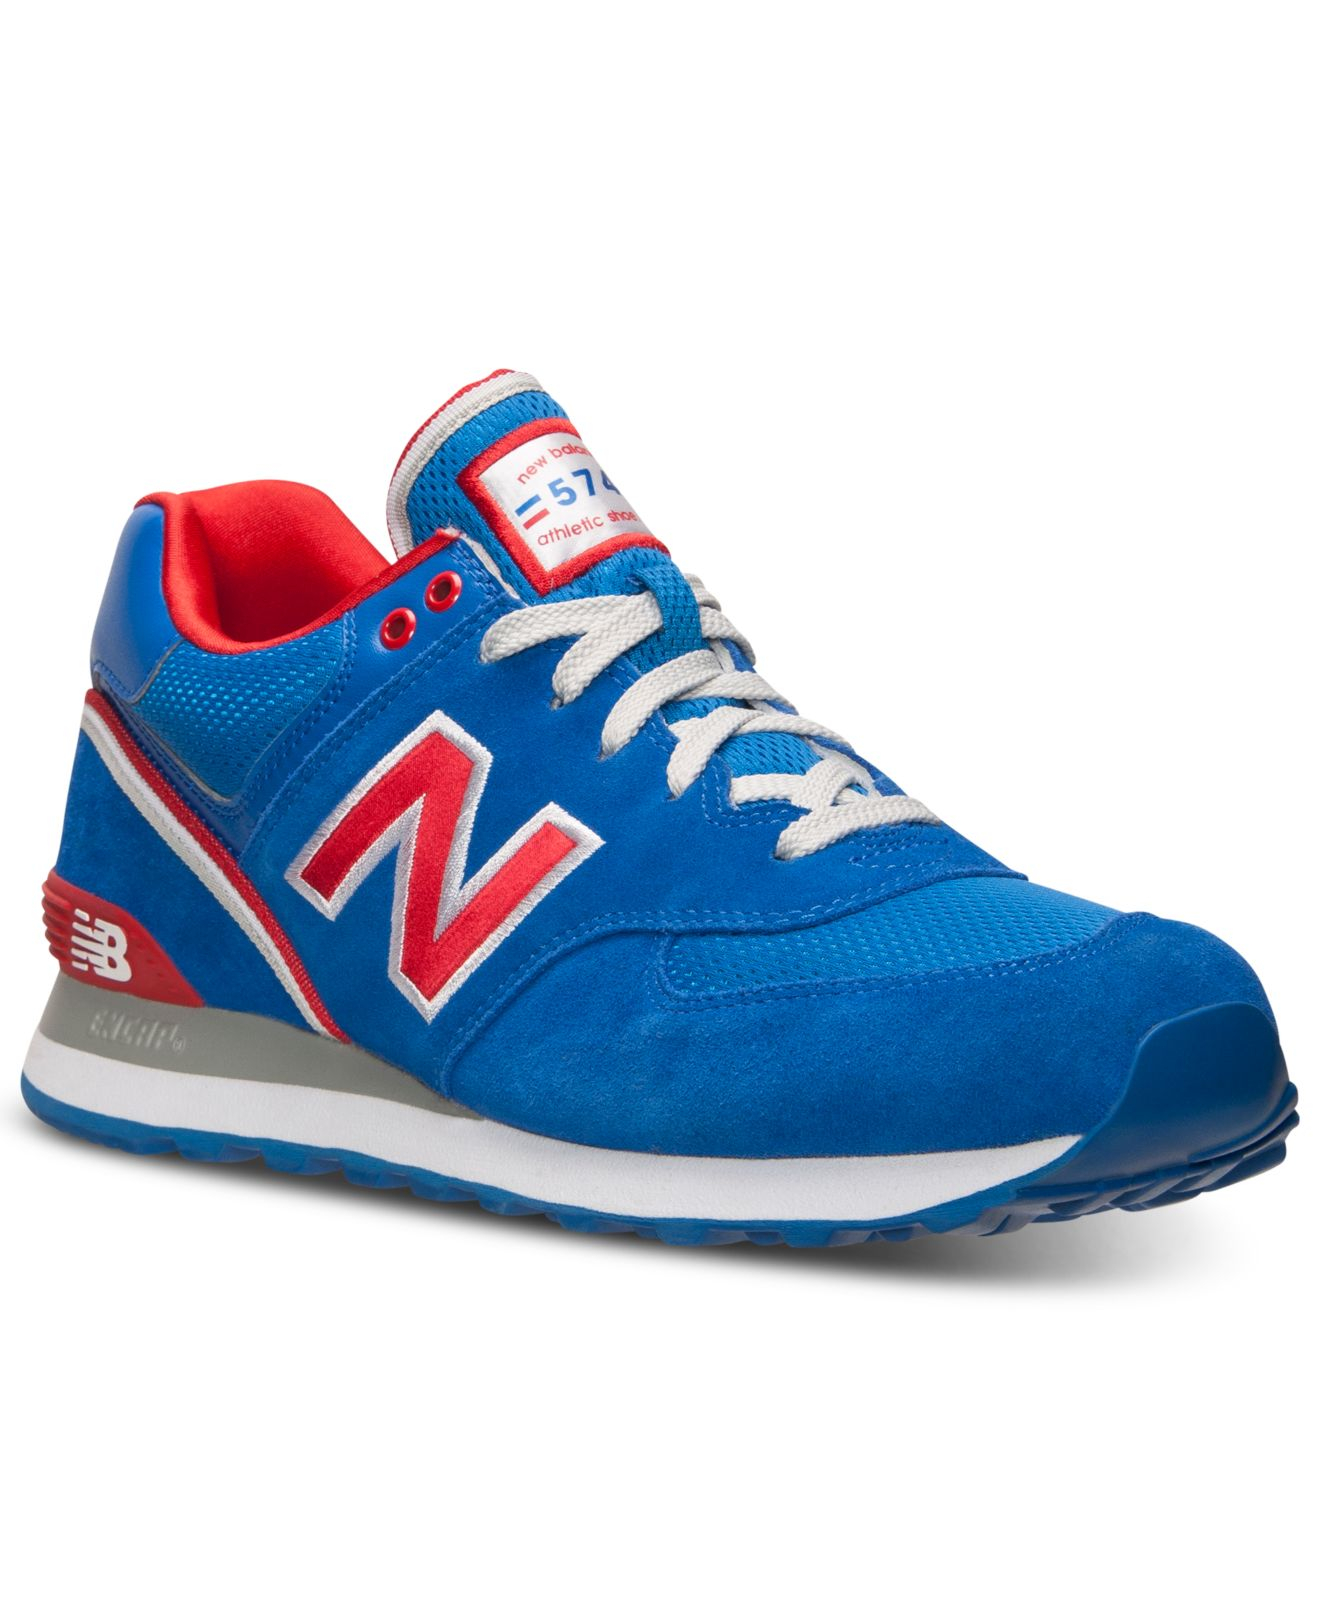 Lyst - New balance Men'S 574 Casual Sneakers From Finish Line in Blue ...